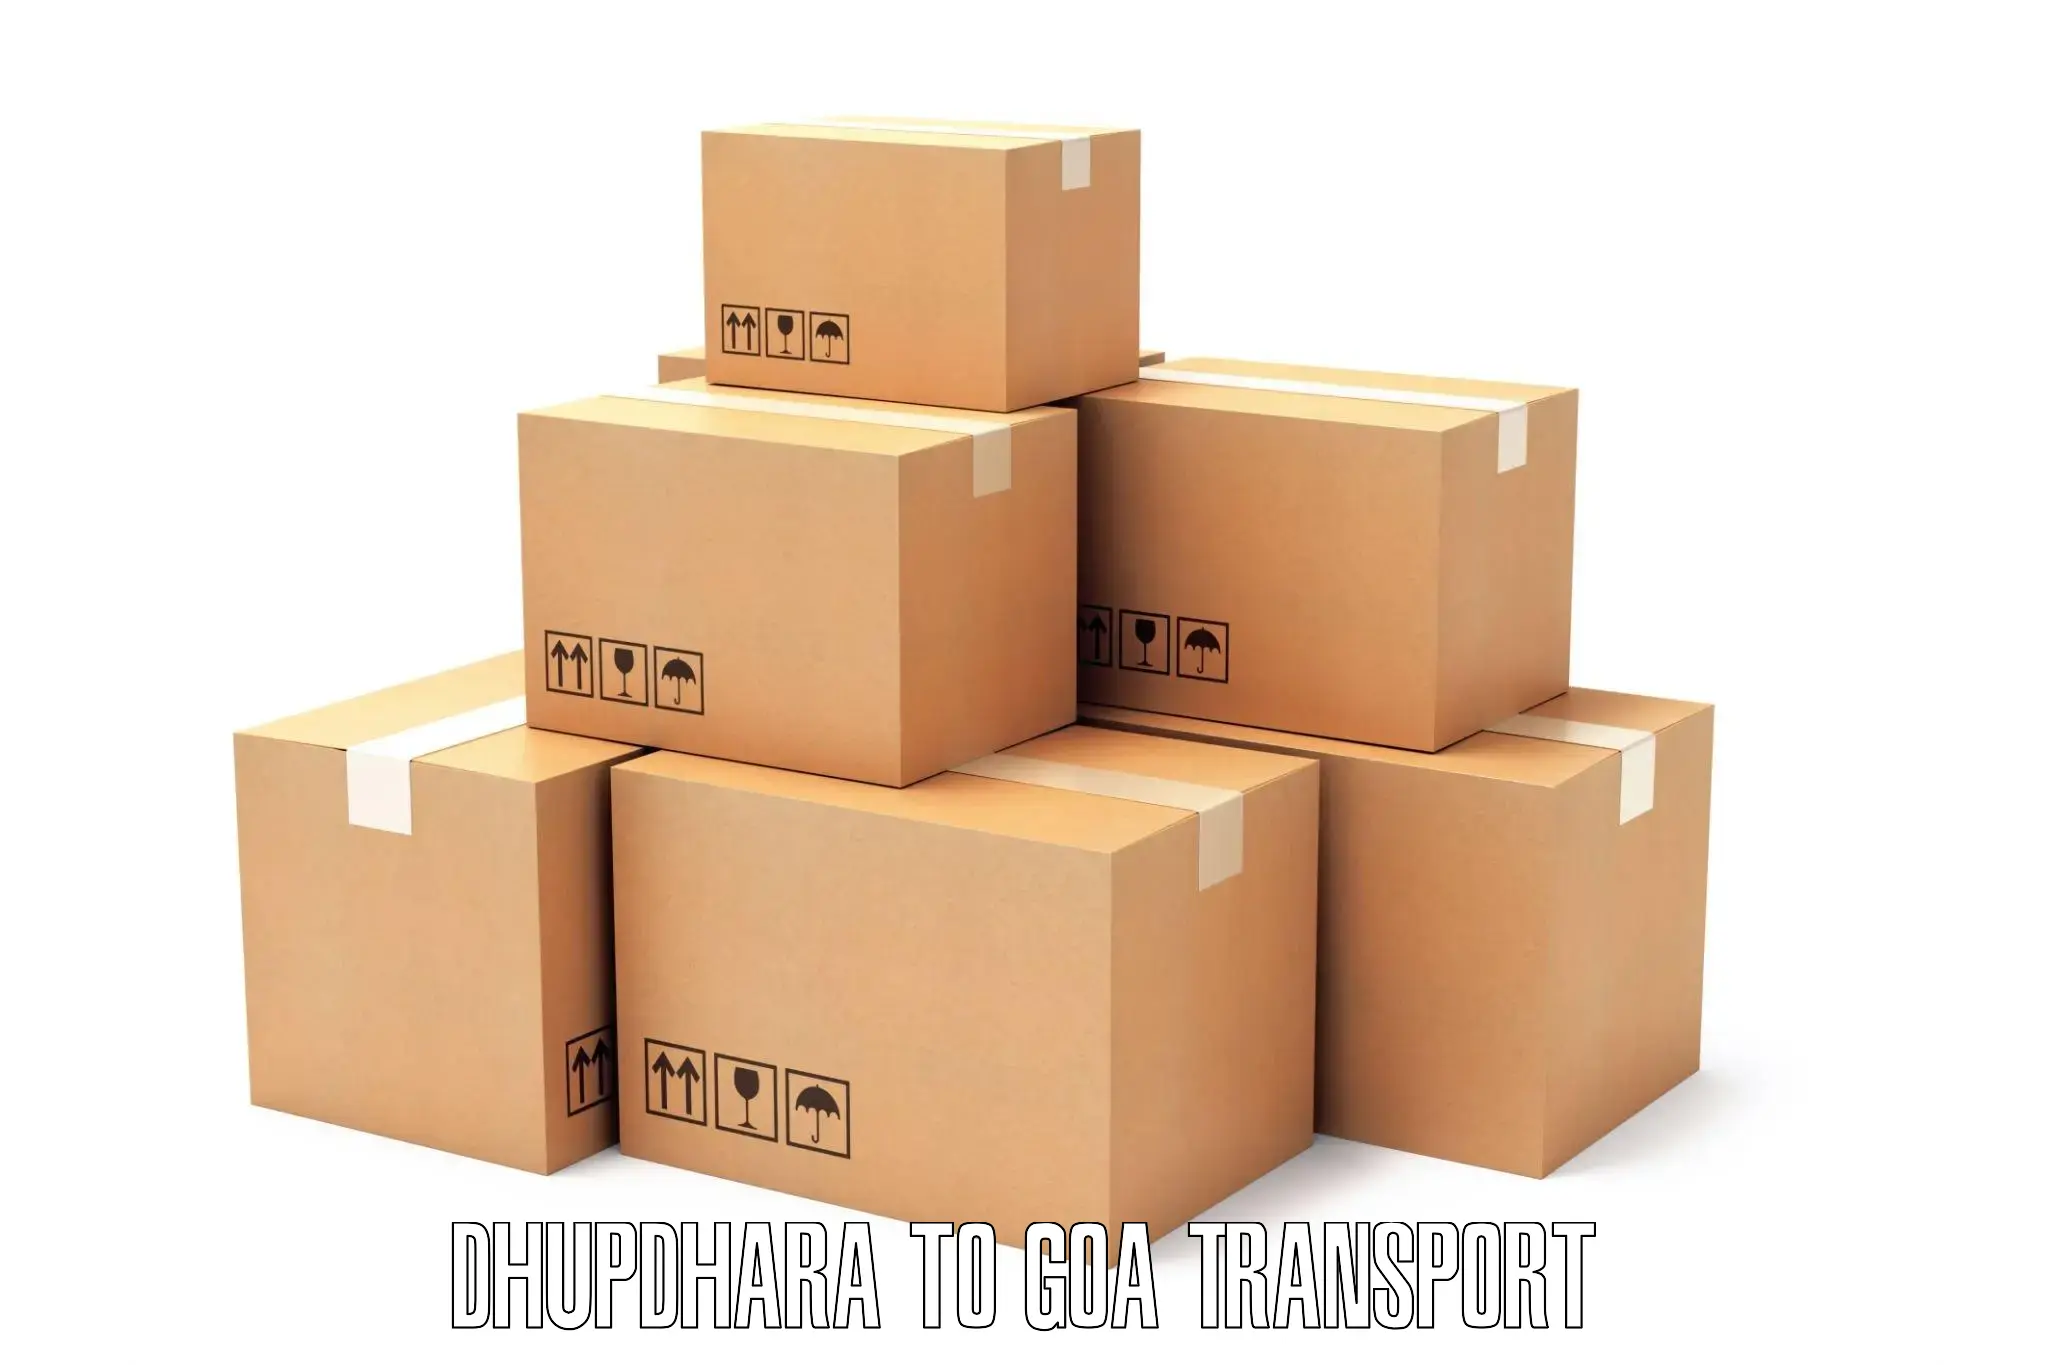 Best transport services in India Dhupdhara to Goa